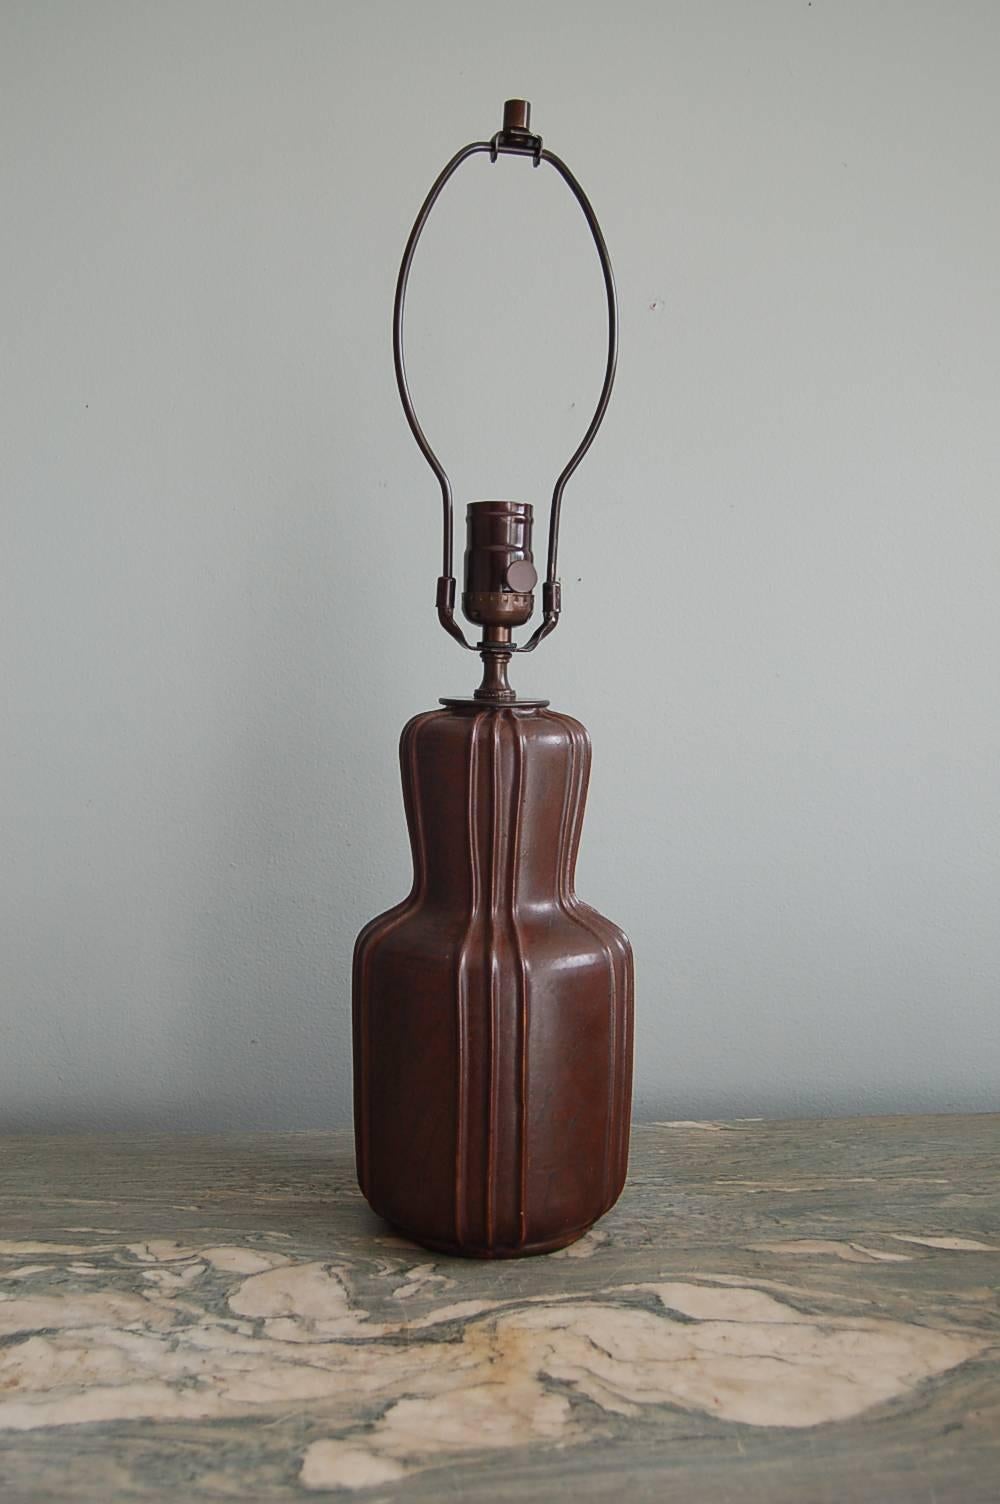 Arne Bang (1901 Frederiksberg-Fensmark, Denmark 1983), double gourd-shaped table lamp, earthenware with brown glaze, circa 1930.

Arne Bang began his career as an apprentice to noted sculptor and ceramicist Niels Hansen Jacobsen. He went on to